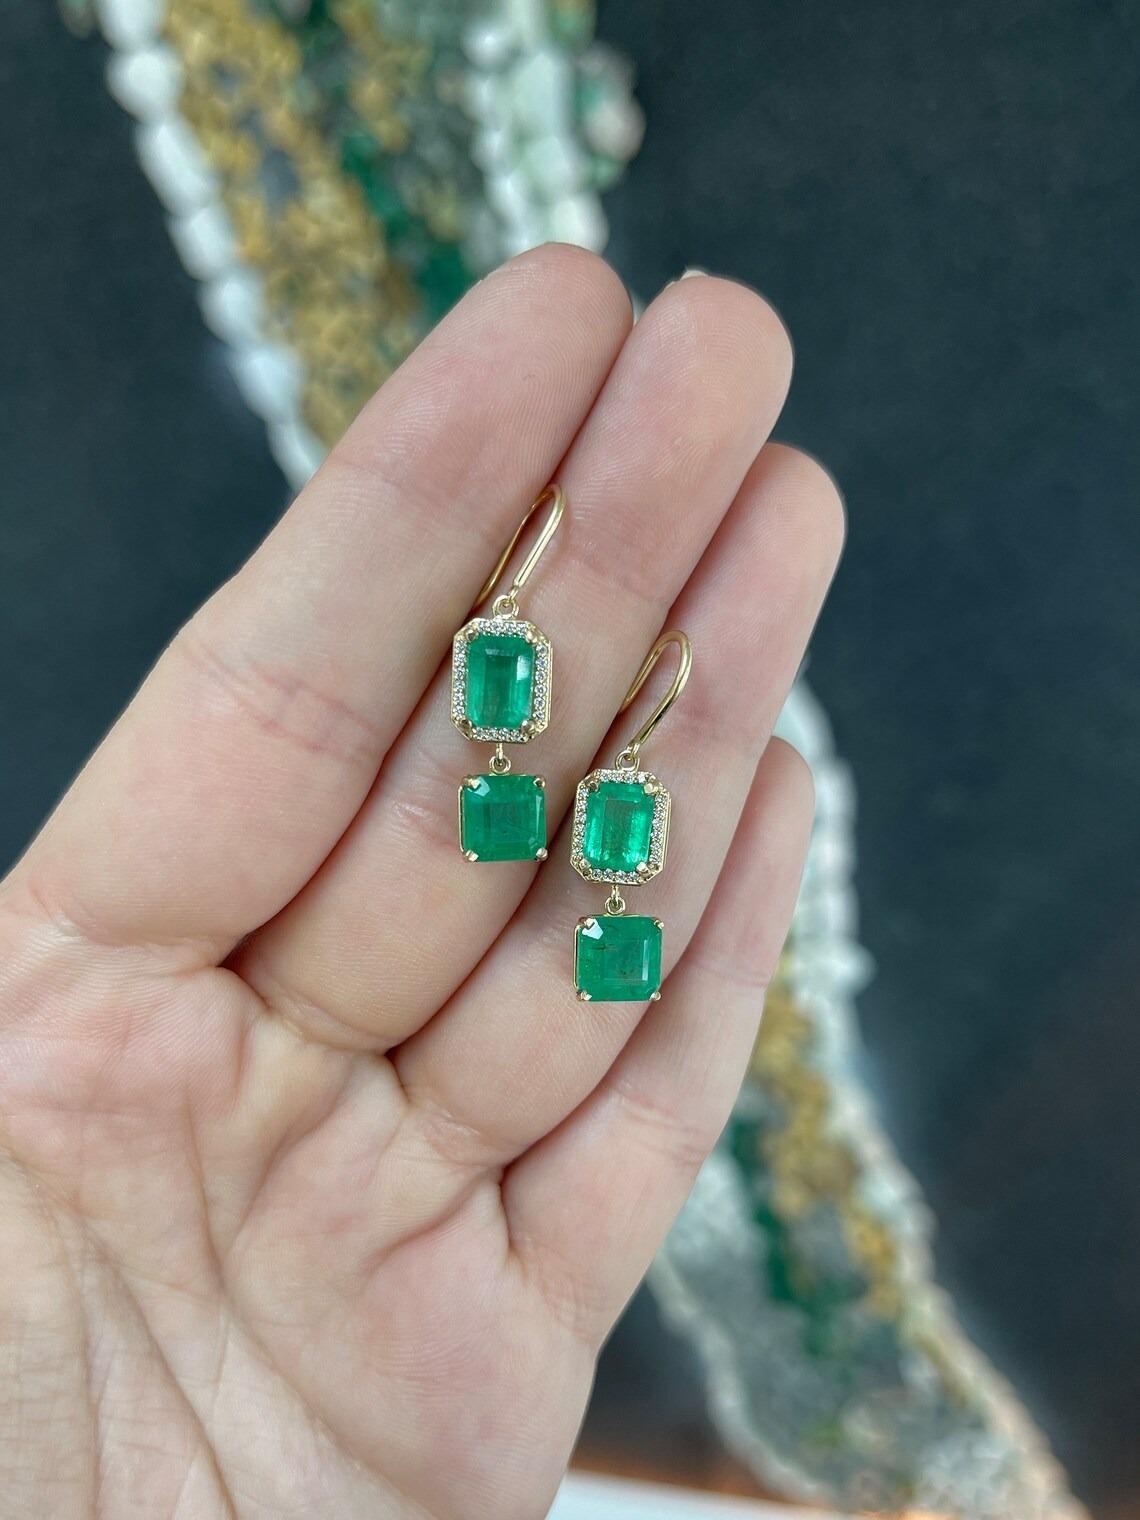 A stunning set of natural emerald and diamond dangle earrings. These spectacular earrings feature over seven carats in emeralds, in both iconic shapes such as the infamous Emerald Cut and Asscher. The gemstones display a remarkable lush green color